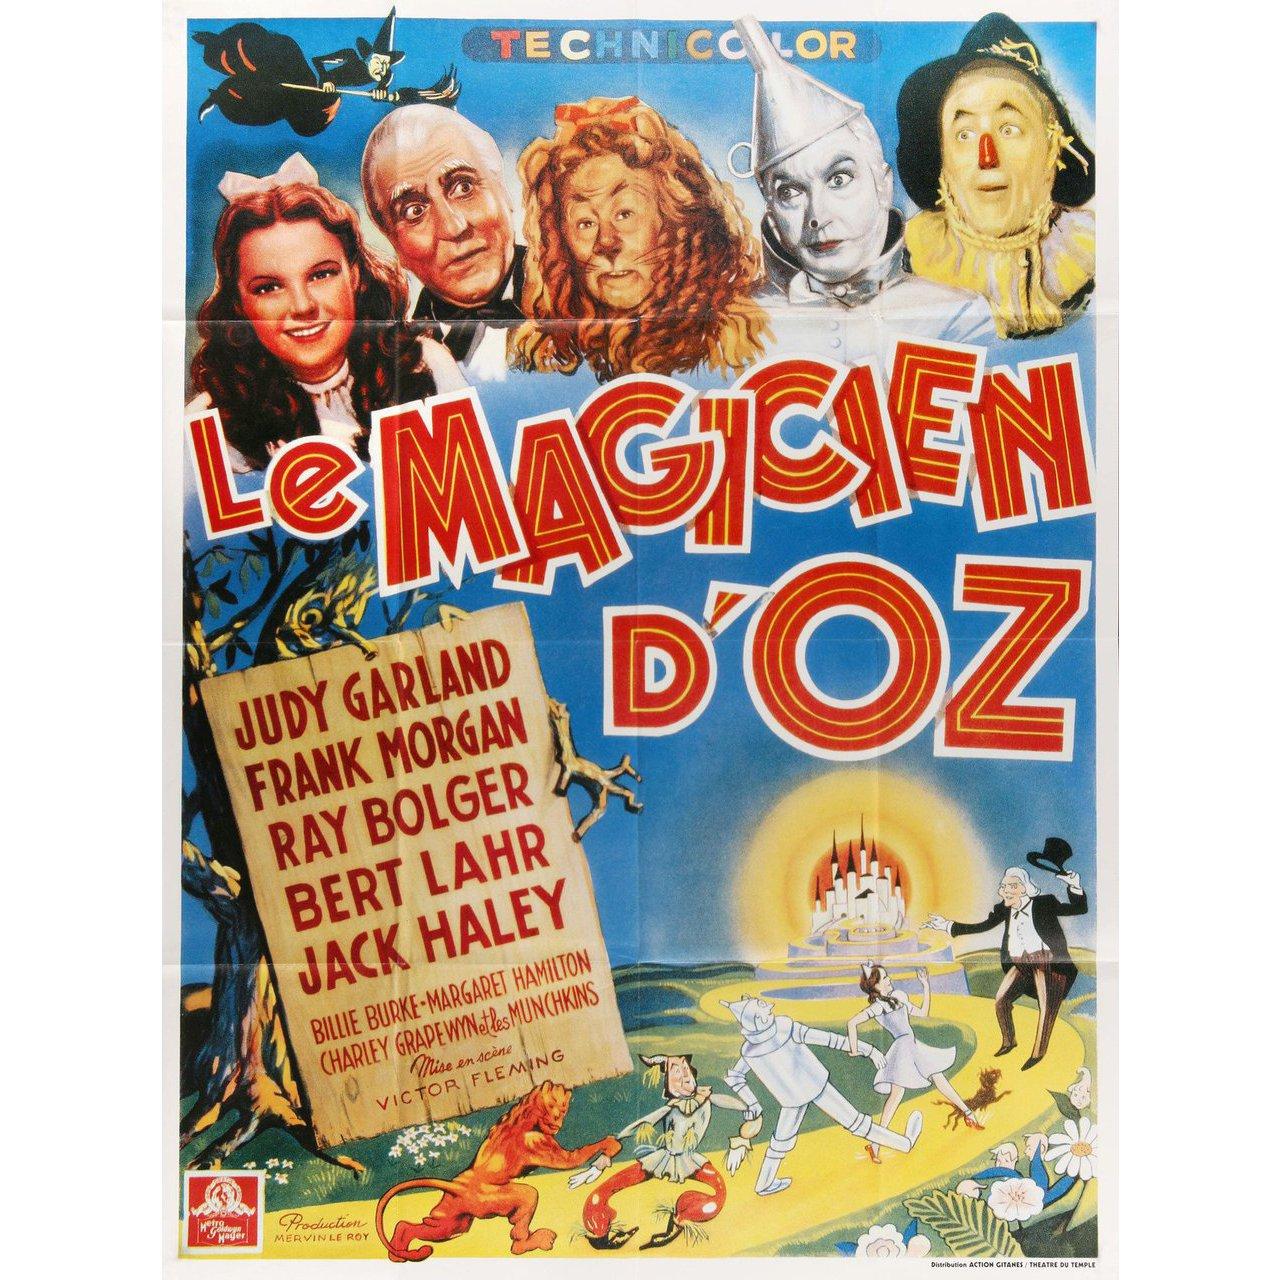 Original 1990s re-release French grande poster for the 1939 film The Wizard of Oz directed by Victor Fleming / George Cukor / Mervyn LeRoy / Norman Taurog / King Vidor with Judy Garland / Frank Morgan / Ray Bolger / Bert Lahr. Fine condition,